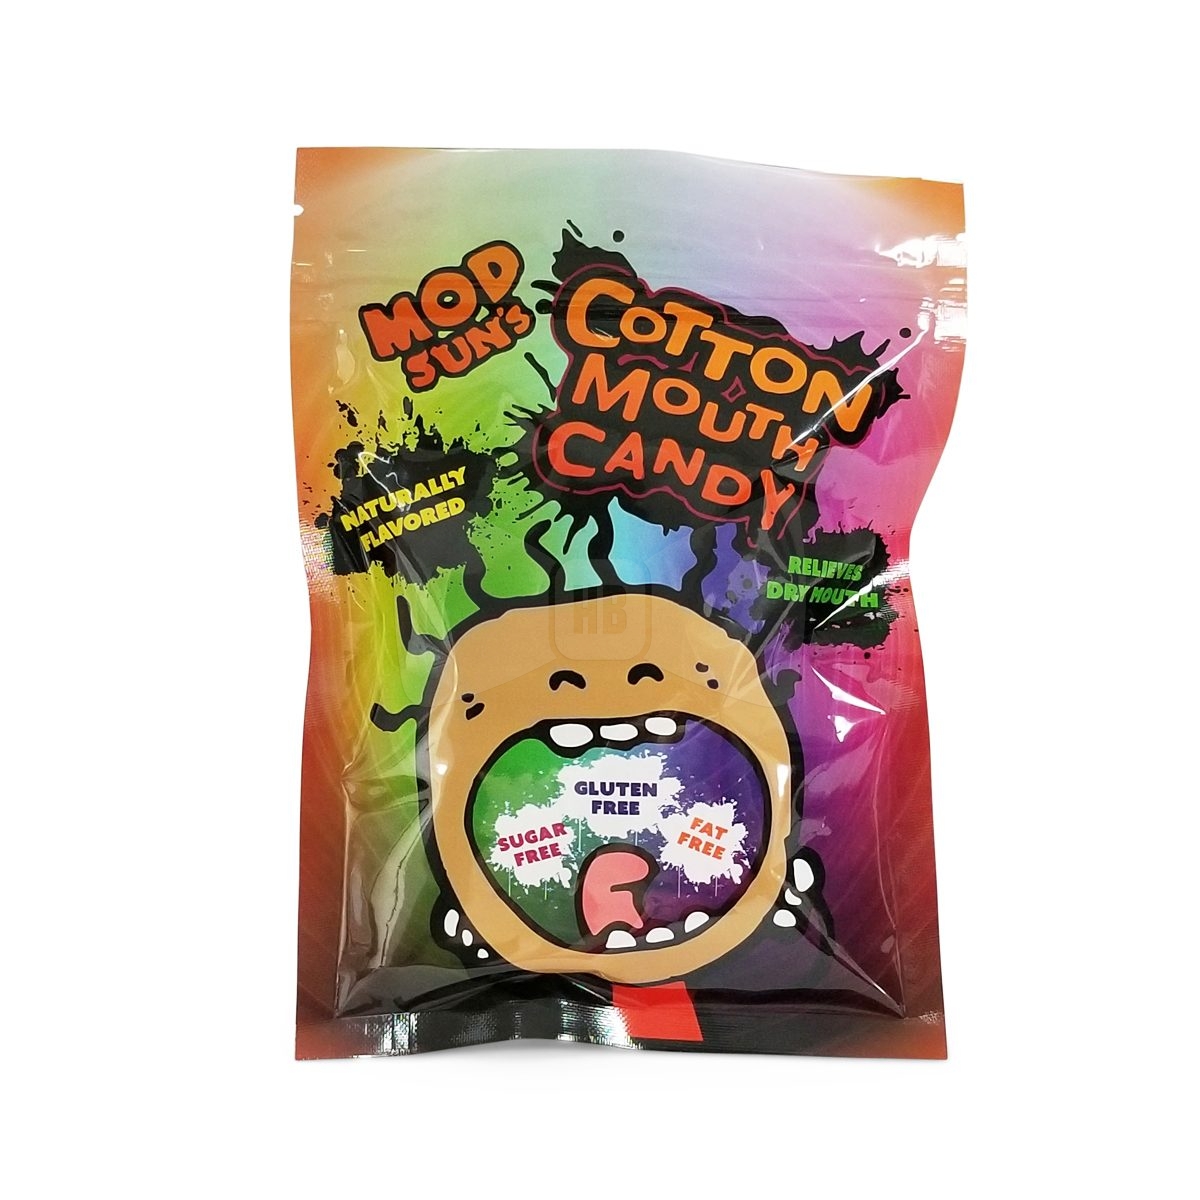 MOD SUN Large Cotton Mouth Candy Bag Single Pack